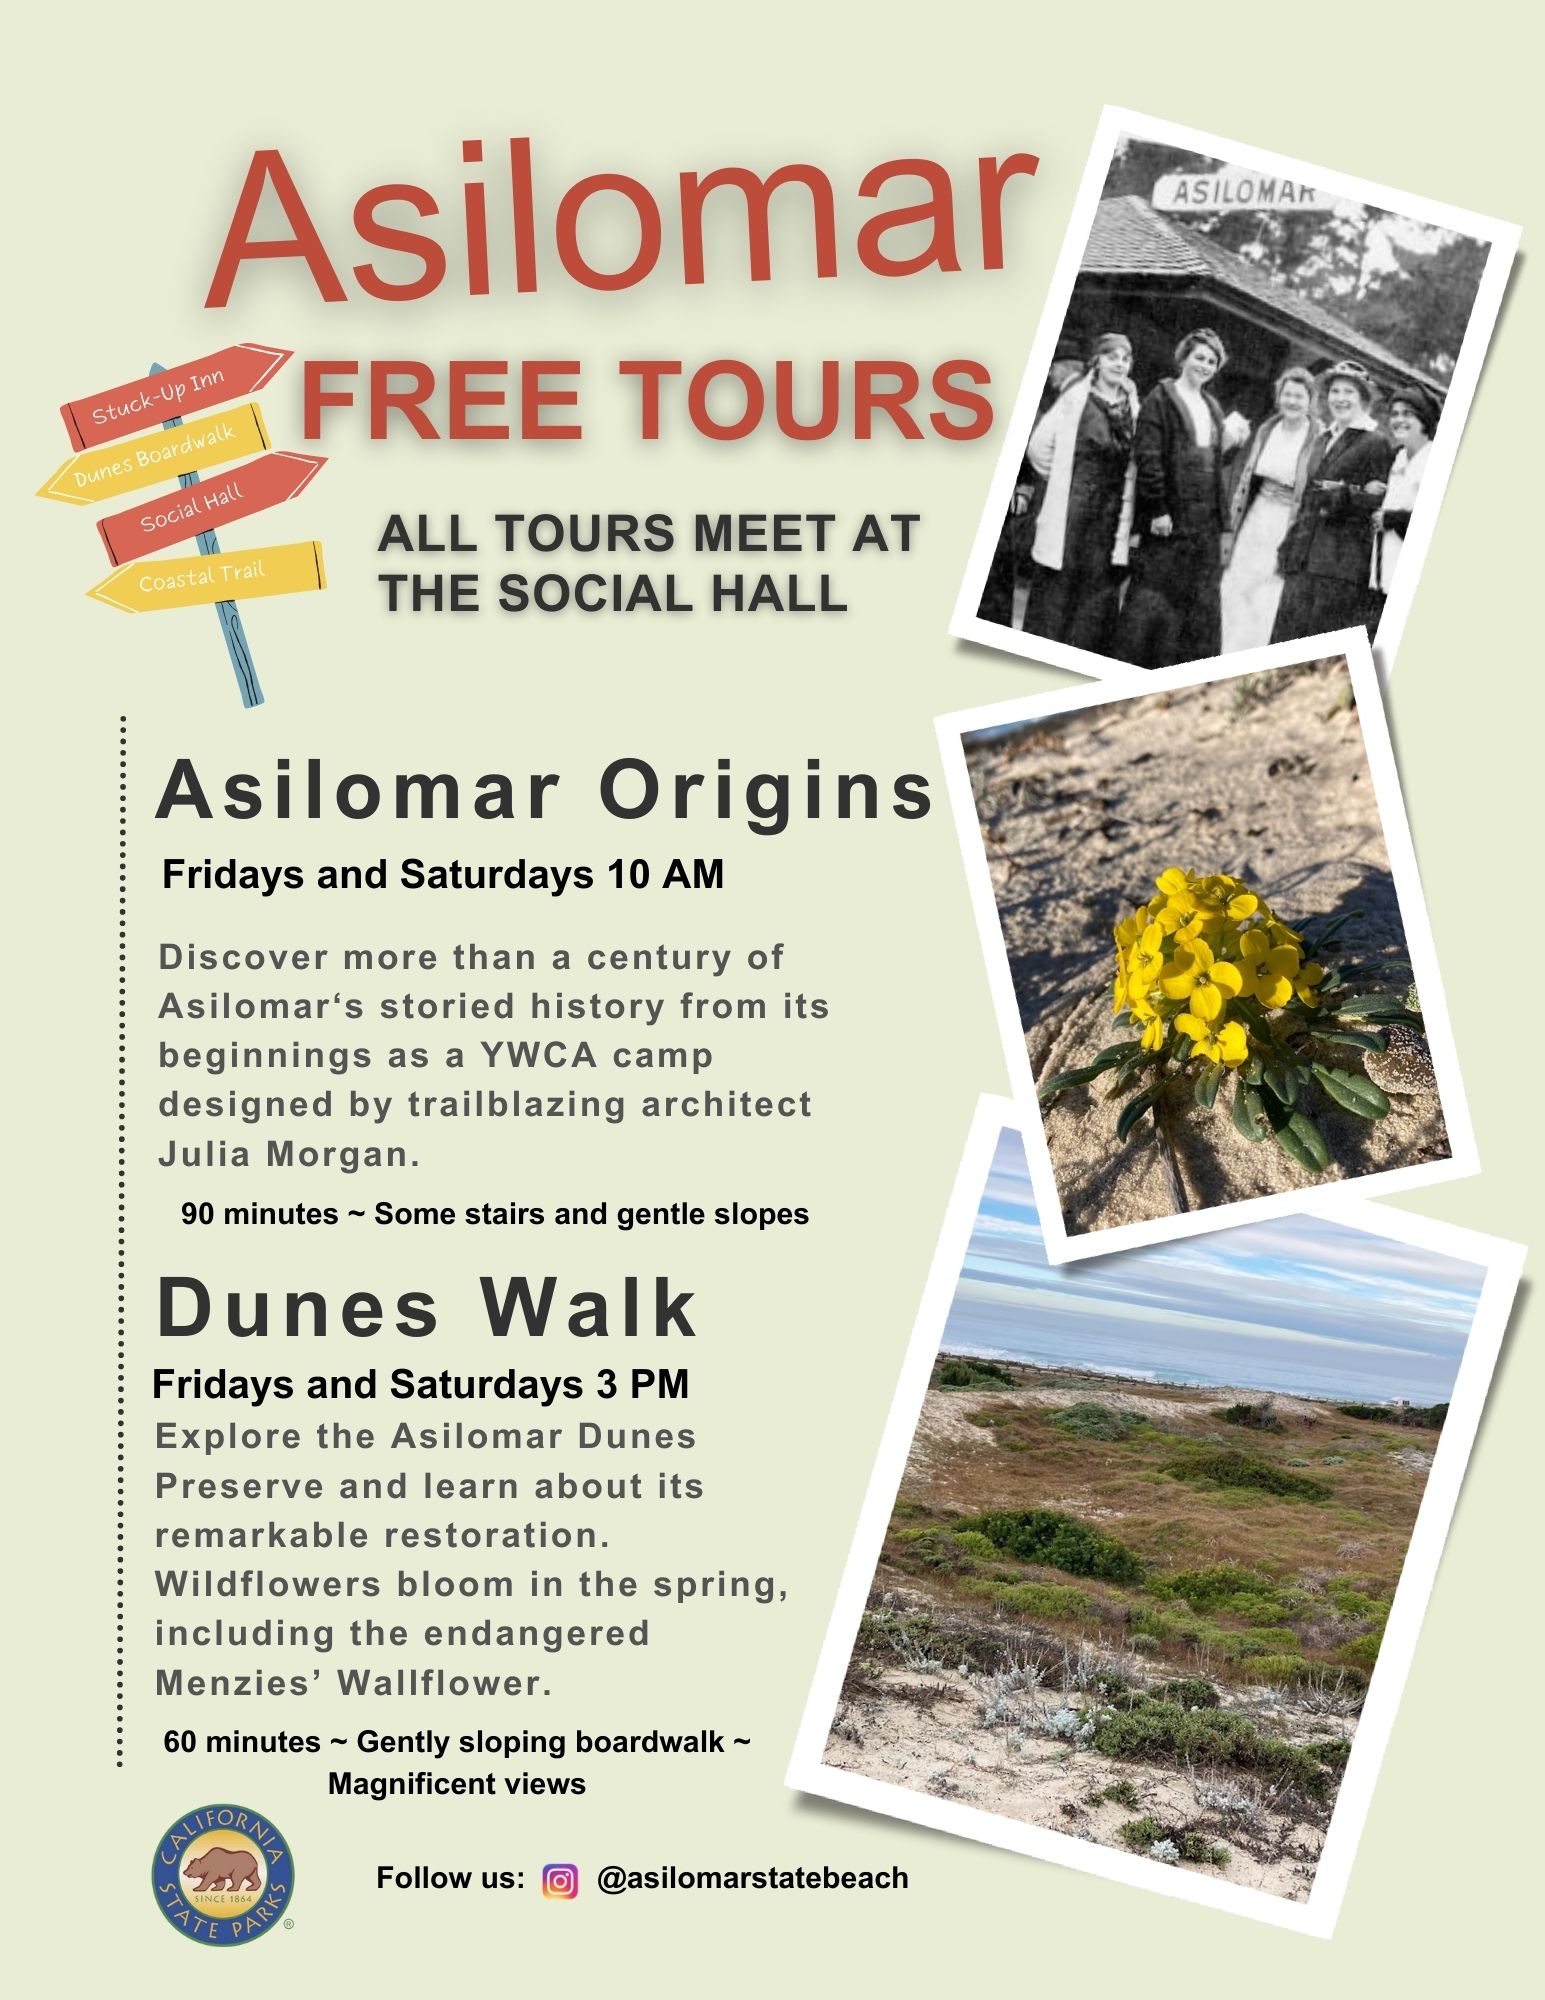 Asilomar State Beach Free Tour Flyer. Tours available Fridays and Saturdays 10 AM and 3 PM